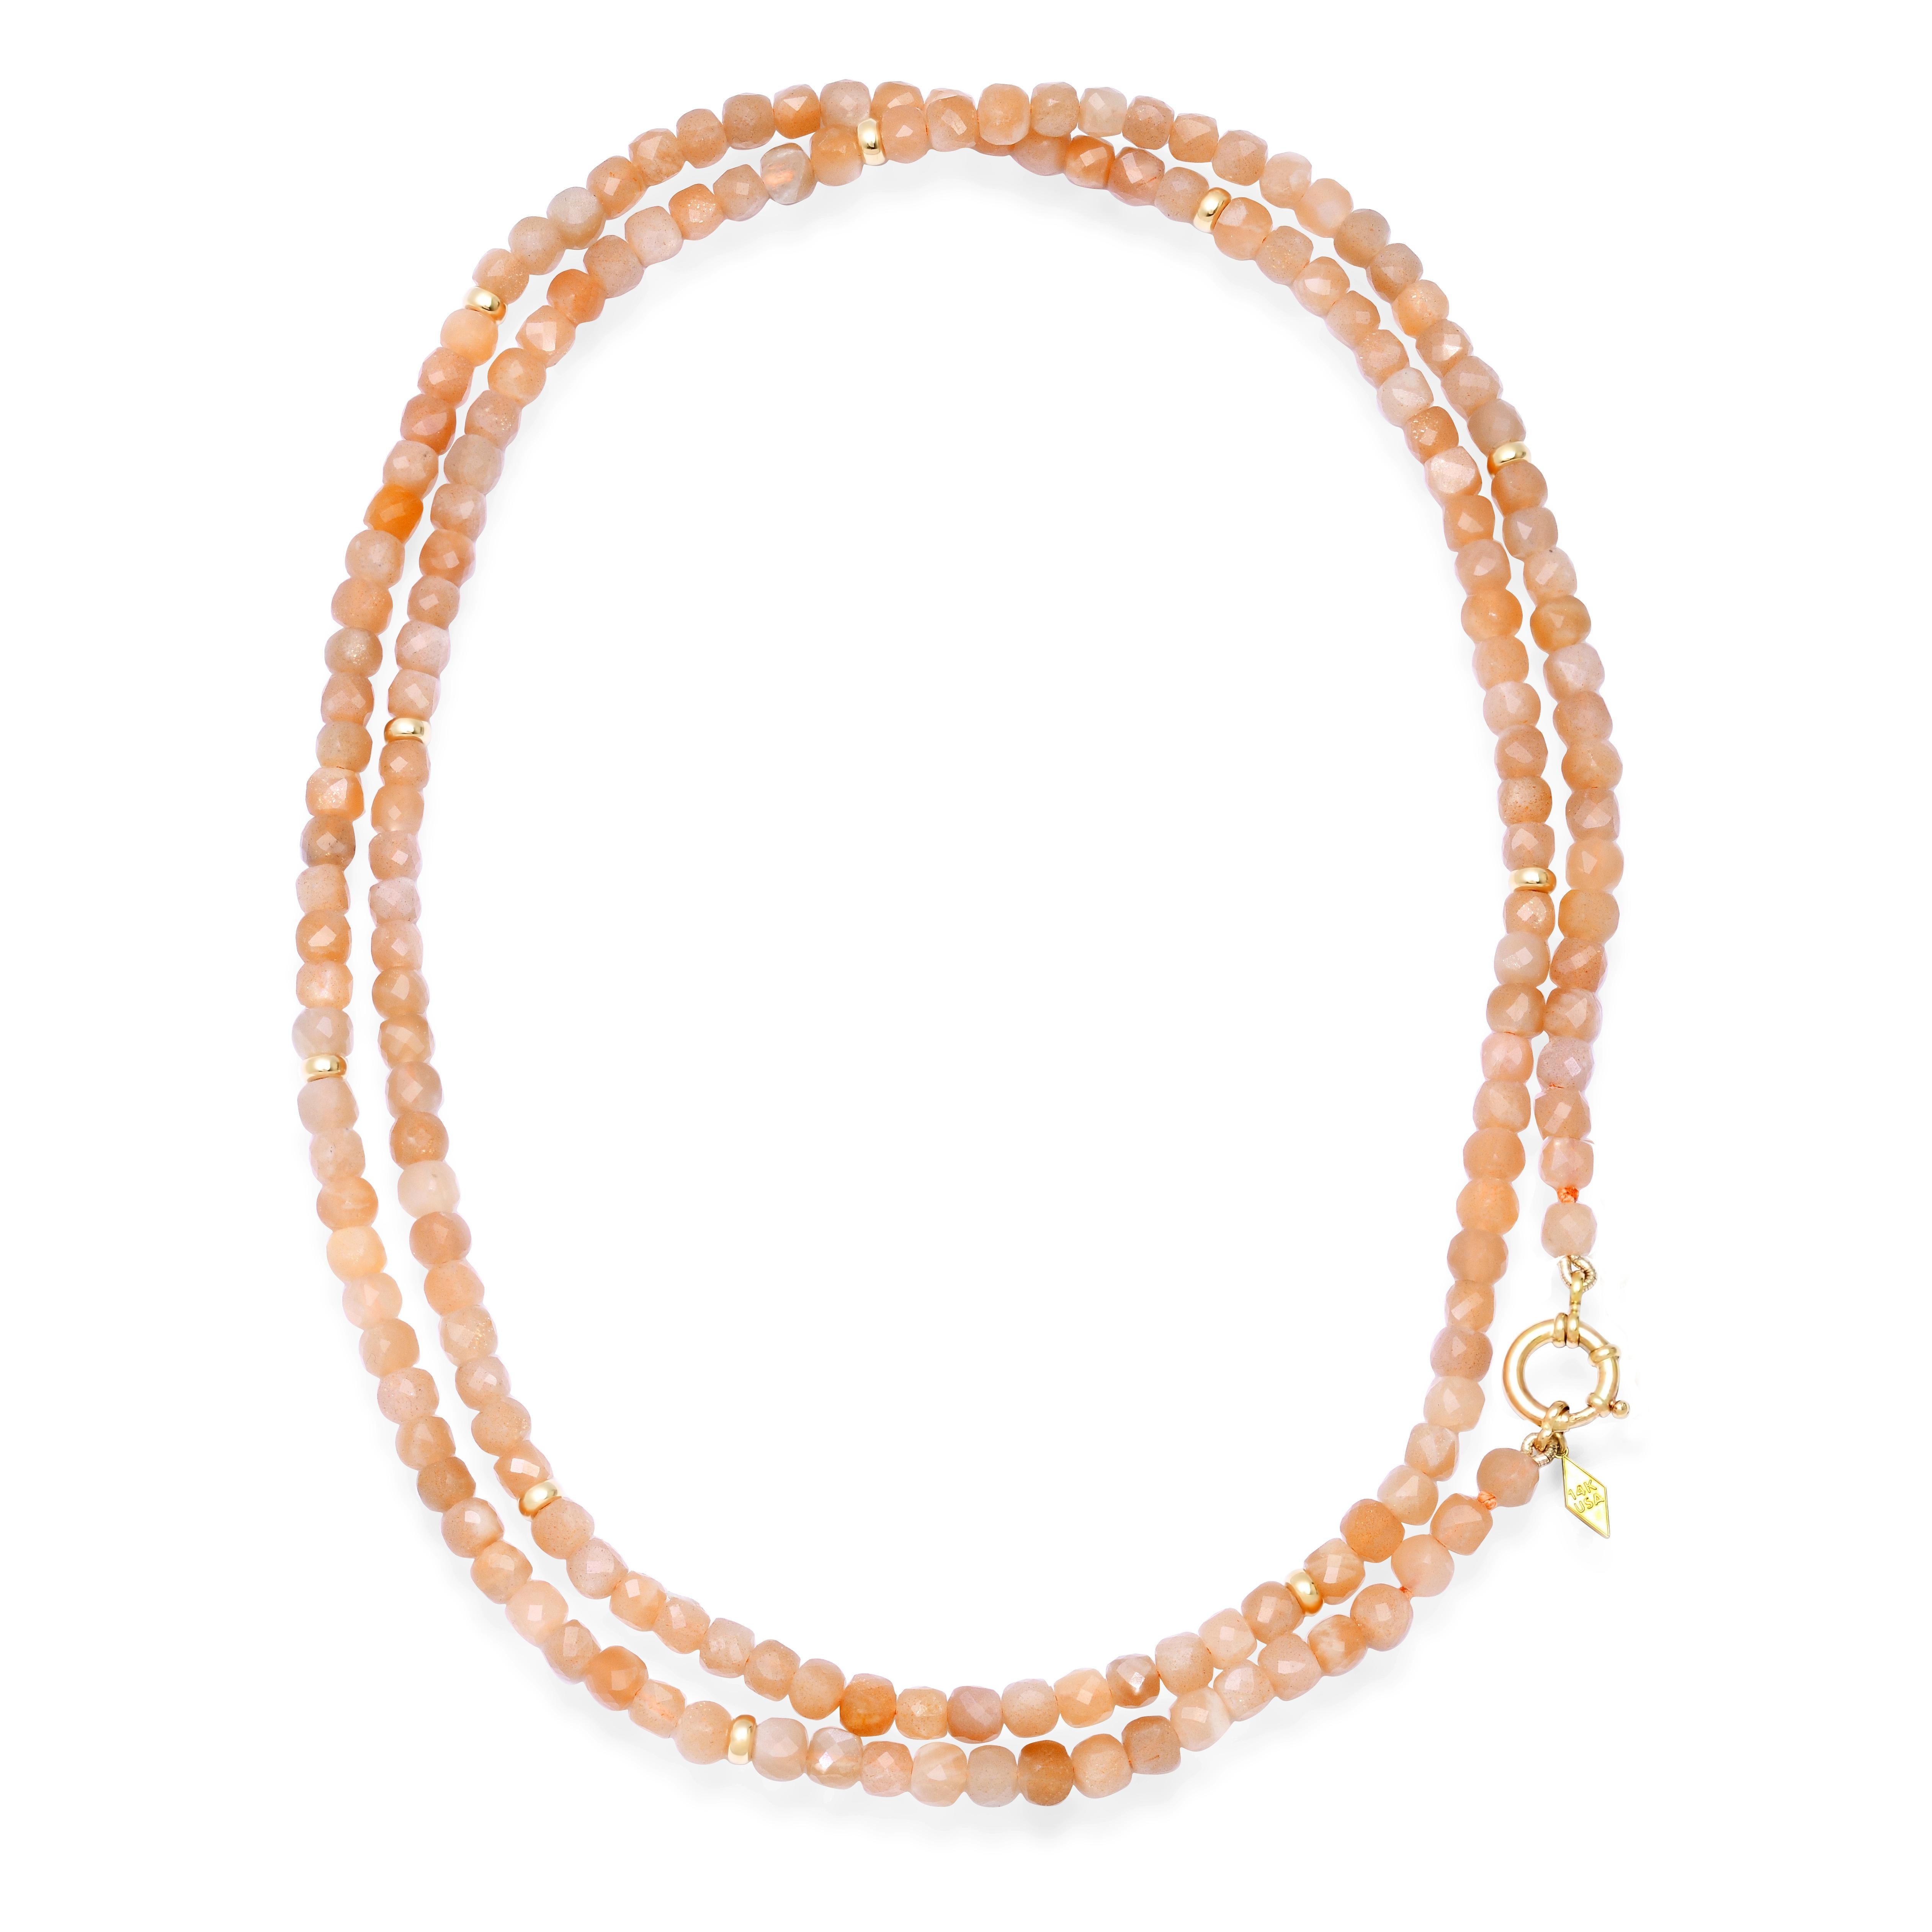 It's all about adding color ... and now we are adding some length too to our popular Chunky Gemstone Necklaces.  Peach Moonstone faceted rondelle stones with ten 14K Gold rondelle beads scattered throughout add the right pop of color with some gold